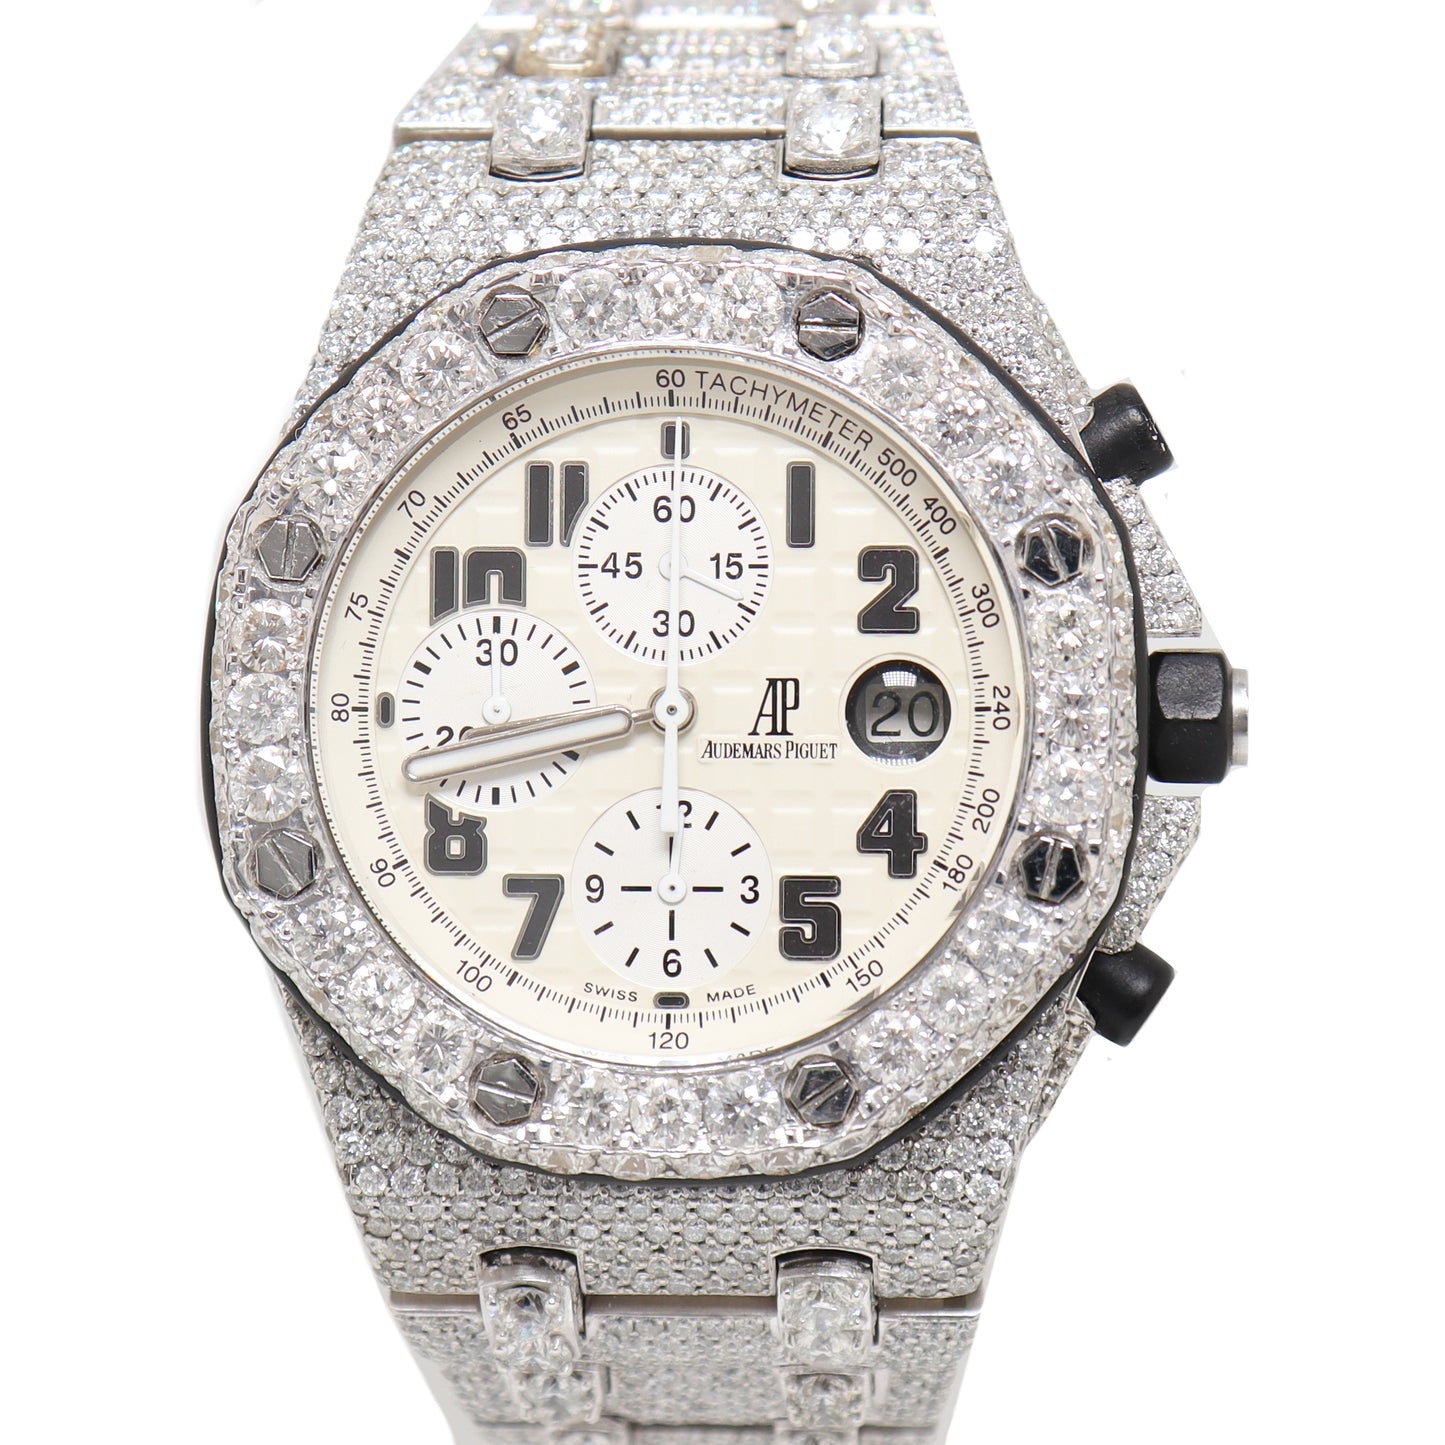 Audemars Piguet Royal Oak Offshore Custom Iced Out Stainless Chronograph Mega Tapisserie Dial Watch Jewelers